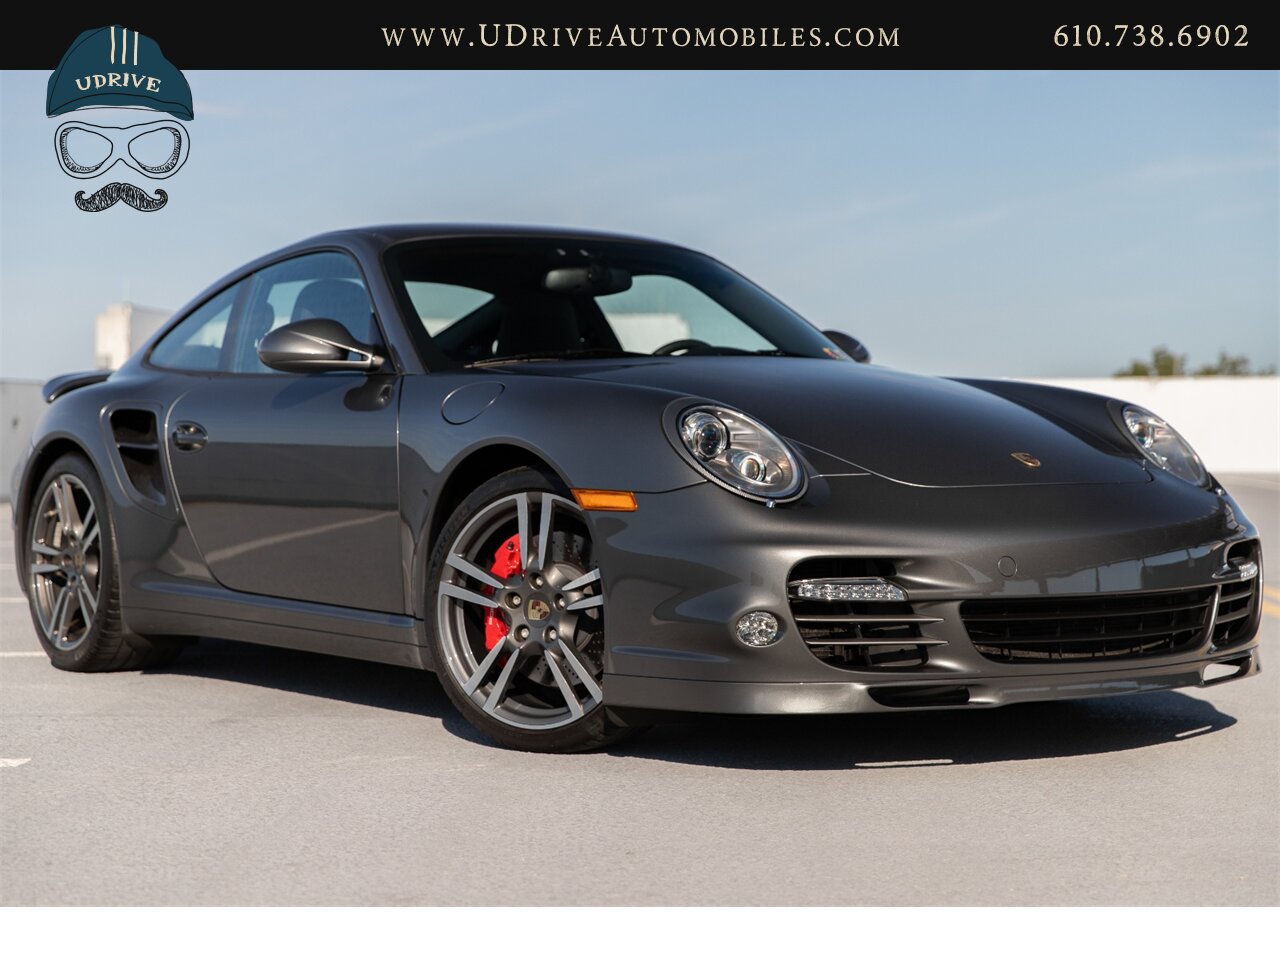 2012 Porsche 911 Turbo 6 Speed Manual 1 Owner 15k Miles PTV  Adaptive Sport Seats Sport Shifter 997.2 Extremely Rare - Photo 4 - West Chester, PA 19382